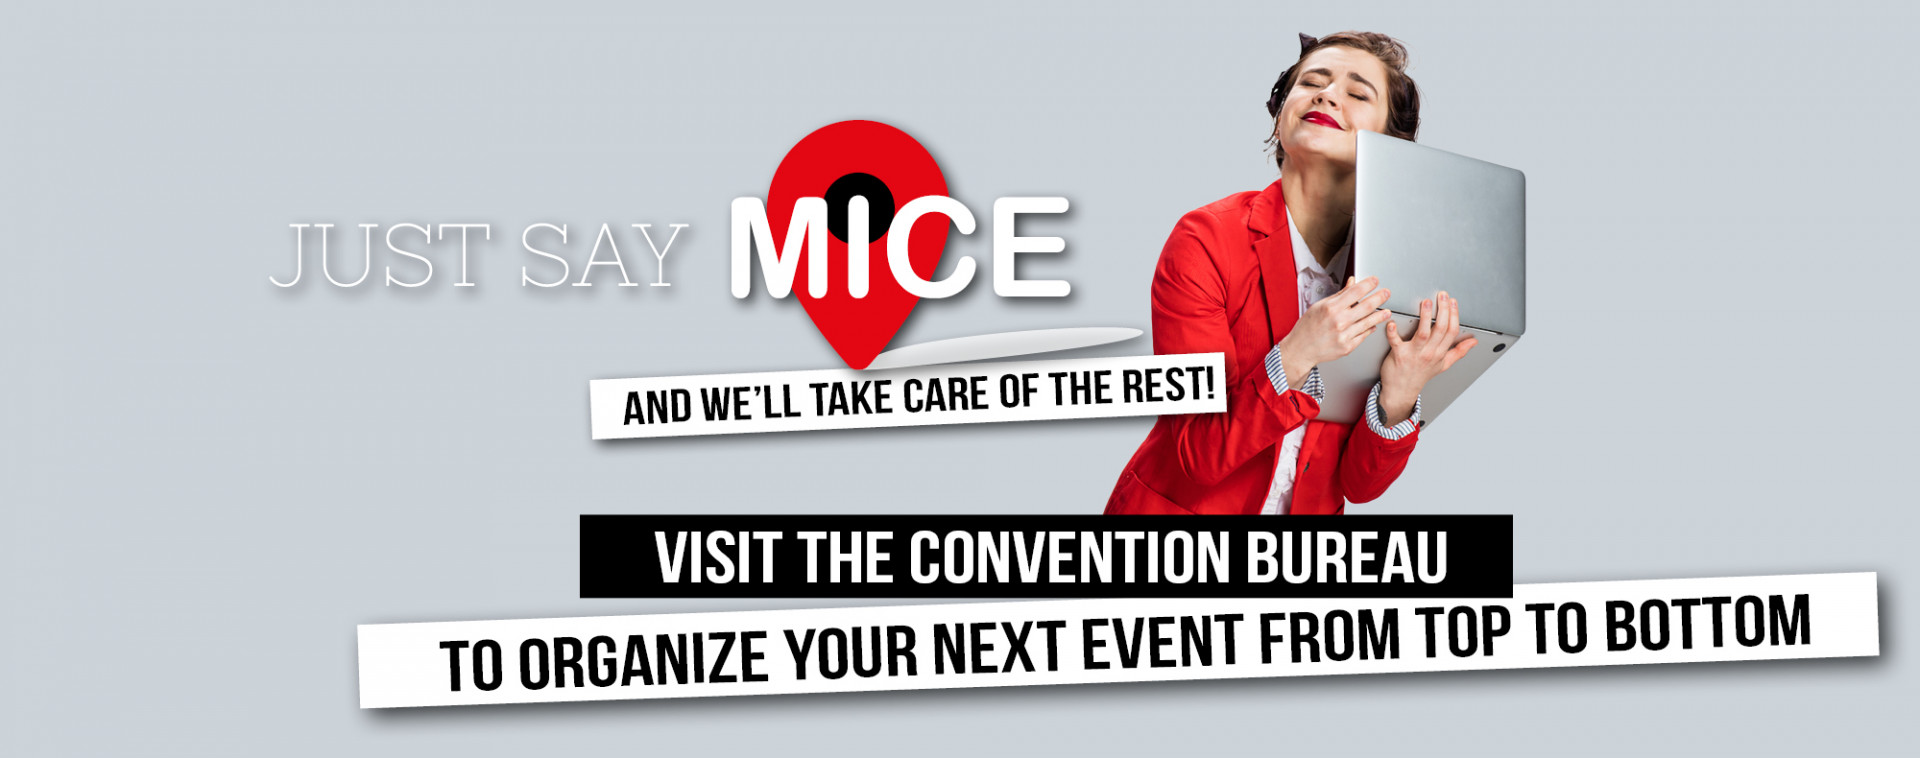 Just say MICE - Your event from A to Z - Convention Bureau ▪️ MICE Liège-Spa | © Getty Images